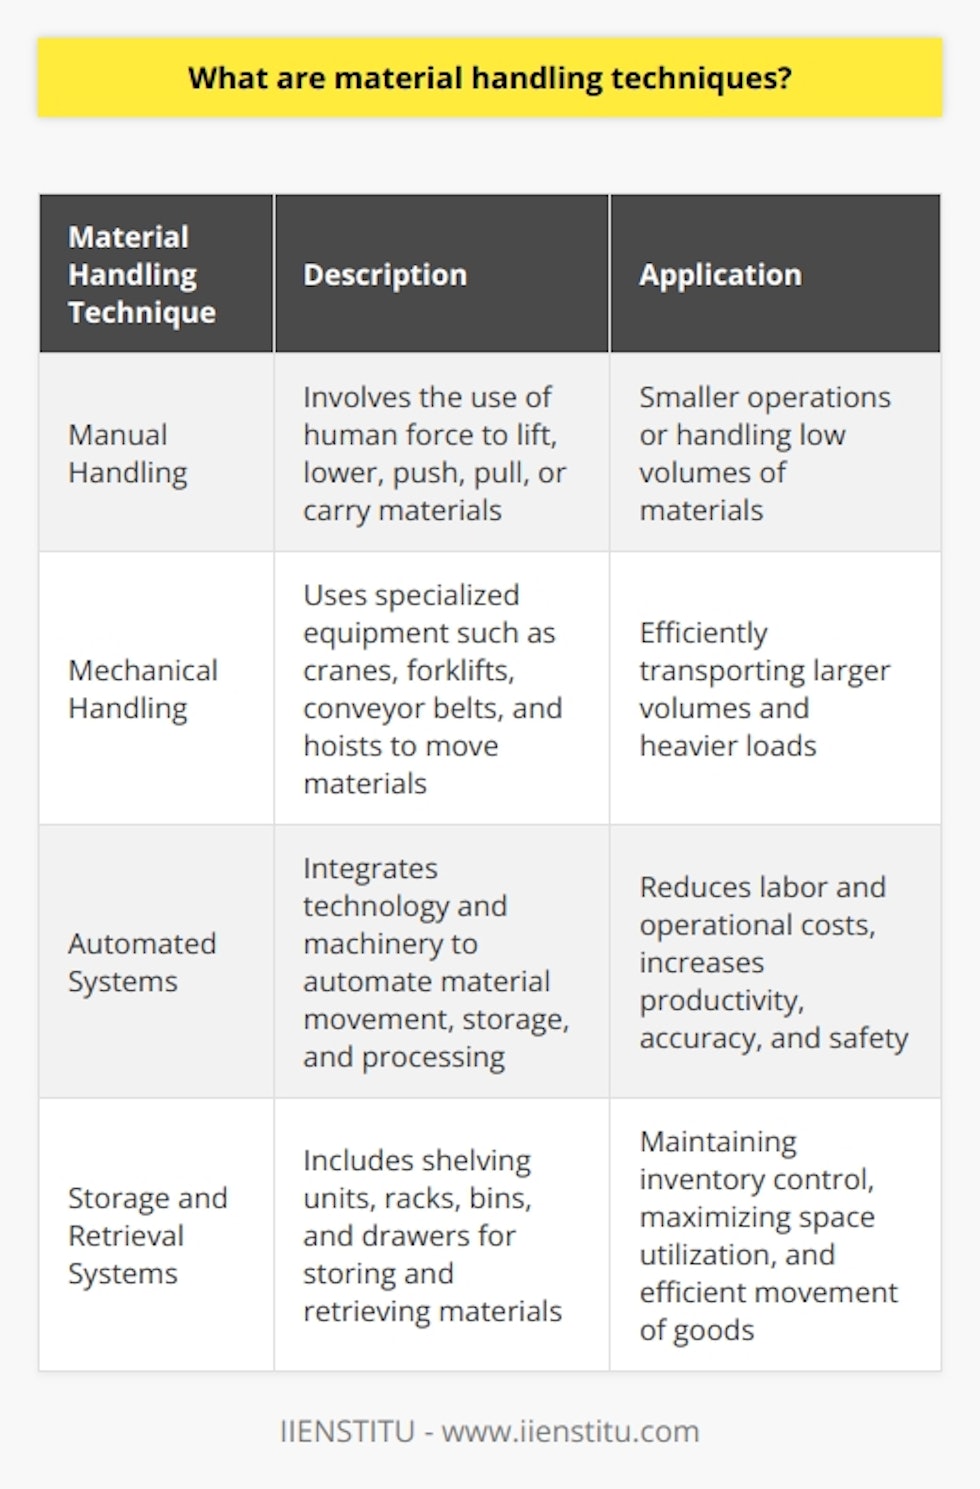 Material handling techniques encompass a wide range of methods and equipment used to handle, store, and transport materials within facilities or across supply chains. These techniques are crucial in industries such as manufacturing, warehousing, and logistics, as they aim to improve efficiency, productivity, and safety while managing inventory effectively. In this article, we will provide an overview of the four main categories of material handling techniques: manual handling, mechanical handling, automated systems, and storage and retrieval systems.Manual handling techniques involve the use of human force to manually lift, lower, push, pull, or carry materials. This technique is most suitable for smaller operations or when handling low volumes of materials. Common equipment used in manual handling includes hand trucks, carts, pallet jacks, and canvas slings. It is essential to adhere to ergonomic principles when using manual handling methods to minimize the risk of injuries to workers.Mechanical handling techniques, on the other hand, involve the use of specialized equipment to move materials. This category includes cranes, forklifts, conveyor belts, and hoists. Mechanical handling methods are ideal for efficiently transporting larger volumes and heavier loads, reducing the need for manpower and minimizing the potential for injuries. The suitability of mechanical handling techniques depends on various factors such as the size of the load, the type of material being handled, and the layout of the facility.Automated material handling systems integrate technology and machinery to streamline material movement, storage, and processing. These systems are highly efficient and can significantly reduce labor and operational costs. Examples of automated systems include robotic palletizers, automated guided vehicles (AGVs), and autonomous mobile robots (AMRs). Implementing automation requires a significant investment in technology, equipment, and training. However, the benefits include increased productivity, accuracy, and safety.Storage and retrieval techniques involve the equipment and methods used to store and retrieve materials as needed. This category includes shelving units, racks, bins, and drawers. Proper storage techniques are essential for maintaining inventory control, maximizing space utilization, and ensuring the efficient movement of goods. The choice of storage system depends on factors such as the type of product, the size of the facility, and the available resources.In conclusion, material handling techniques play a crucial role in the efficient movement, storage, and processing of materials in various industries. By combining manual, mechanical, automated, and storage systems, businesses can optimize workflows, maximize productivity, and minimize costs. When selecting the appropriate techniques for a specific operation, it is essential to carefully consider factors such as facility layout, material type, and available resources.